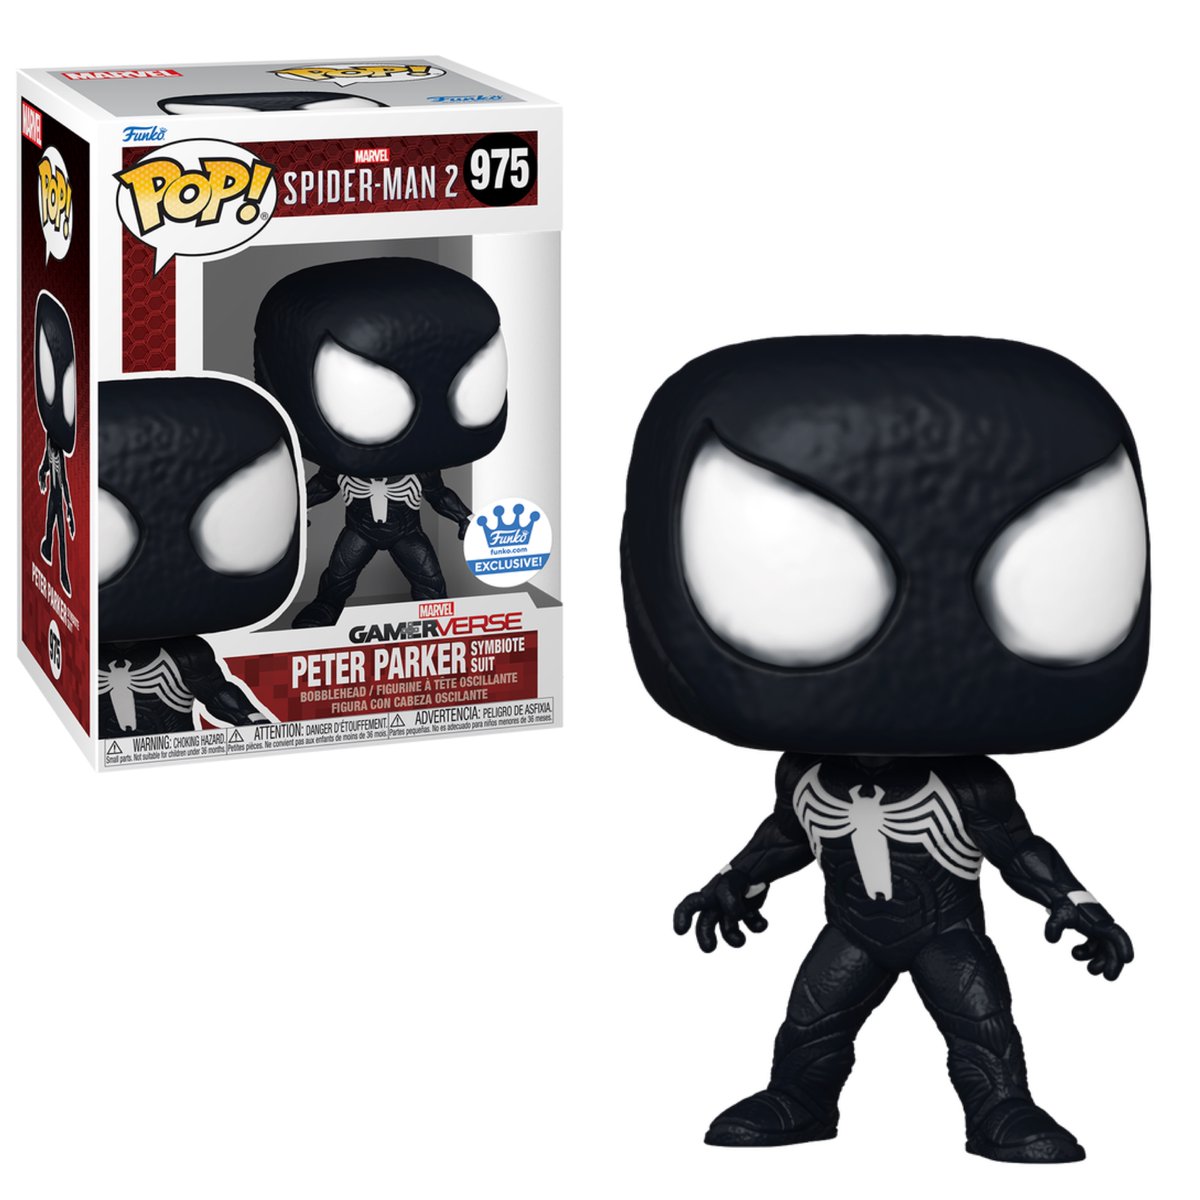 🚨LIVE🚨 Funko exclusive Peter Parker (Symbiote Suit) Pop! #Funko #Spiderman2 #ad

🕸️fph.news/SymbioteSM

#funkopop #ps5 #spiderman #marvel #peterparker #popvinyl #funkopophunters #gamerverse